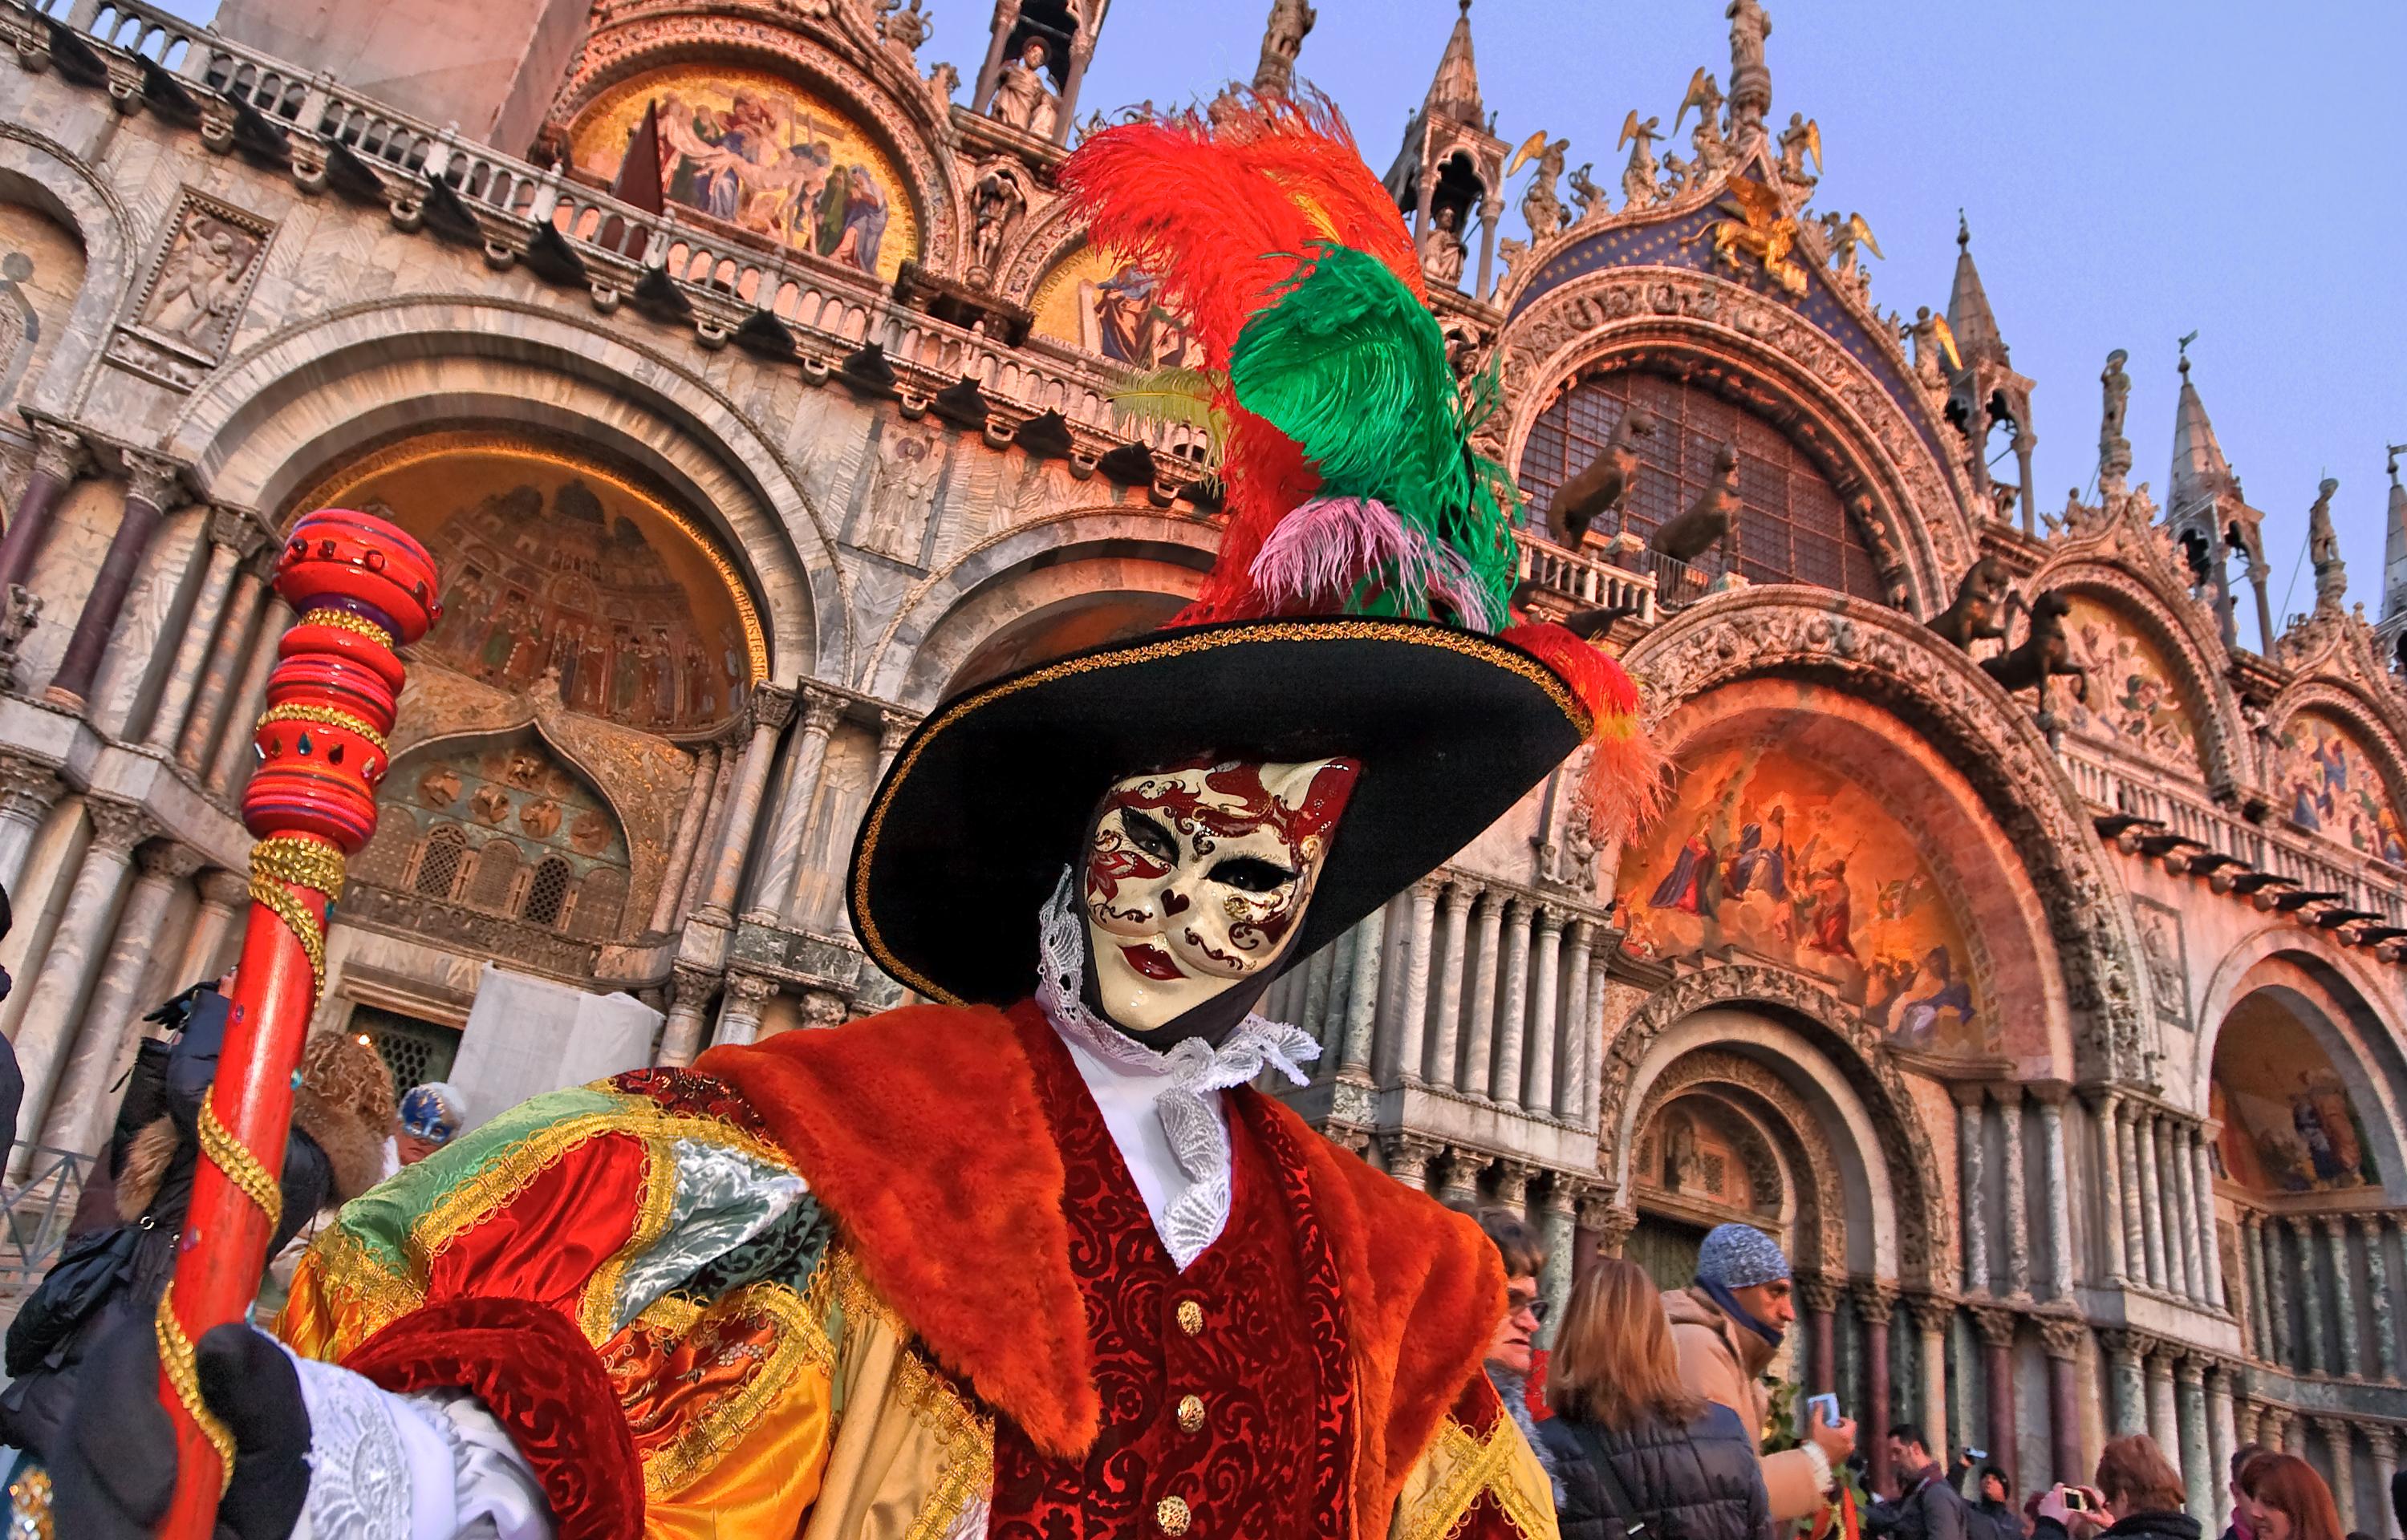 Venice Carnival: Masked Ball in a Venetian Palace – Costume rental included